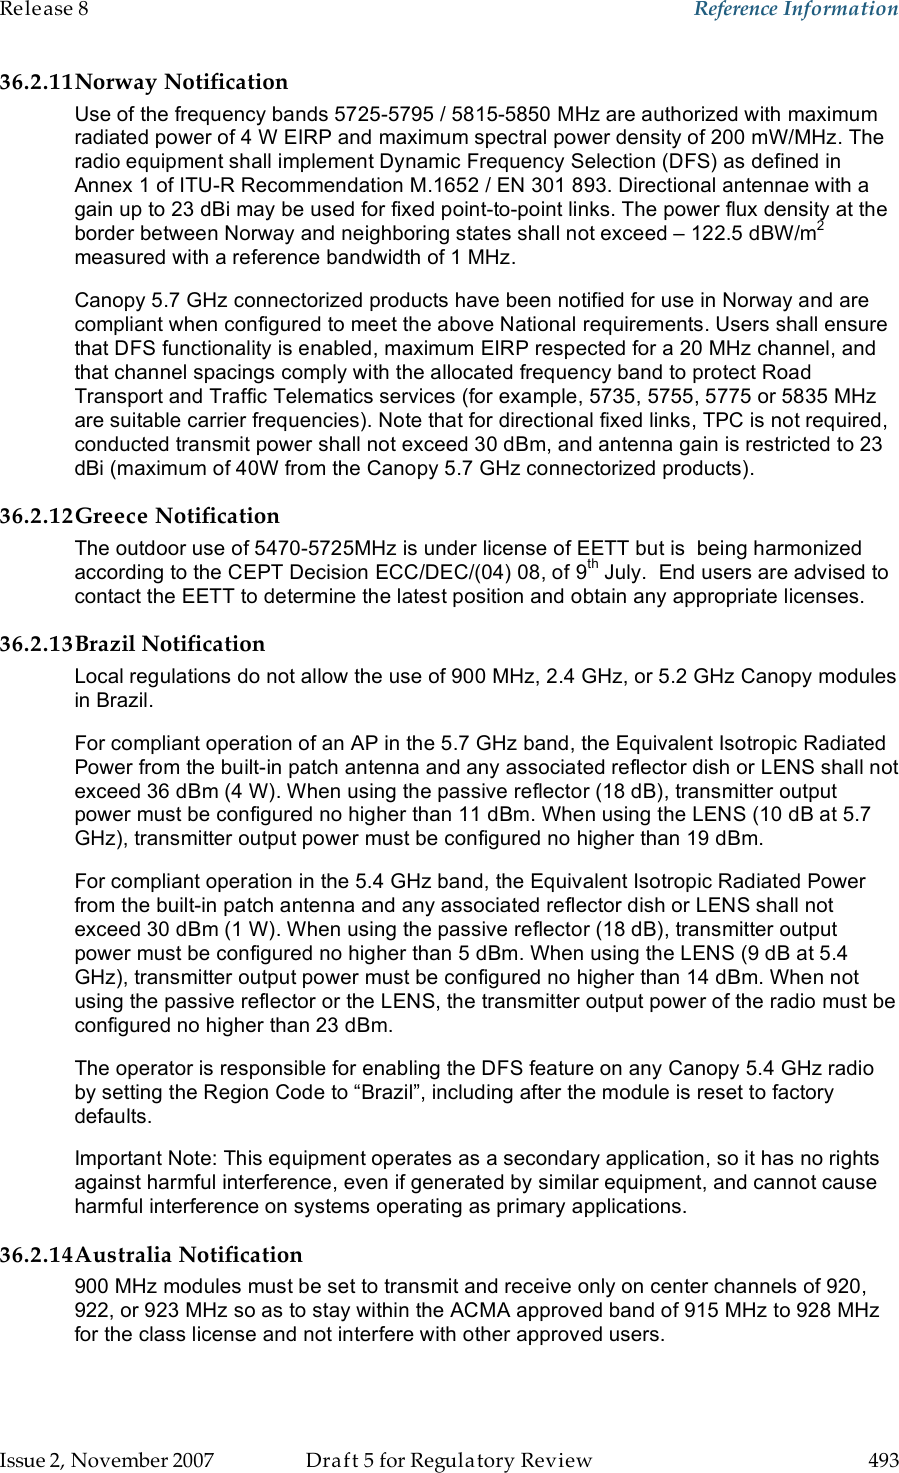 Release 8    Reference Information   Issue 2, November 2007  Draft 5 for Regulatory Review  493     36.2.11Norway Notification Use of the frequency bands 5725-5795 / 5815-5850 MHz are authorized with maximum radiated power of 4 W EIRP and maximum spectral power density of 200 mW/MHz. The radio equipment shall implement Dynamic Frequency Selection (DFS) as defined in Annex 1 of ITU-R Recommendation M.1652 / EN 301 893. Directional antennae with a gain up to 23 dBi may be used for fixed point-to-point links. The power flux density at the border between Norway and neighboring states shall not exceed – 122.5 dBW/m2 measured with a reference bandwidth of 1 MHz.   Canopy 5.7 GHz connectorized products have been notified for use in Norway and are compliant when configured to meet the above National requirements. Users shall ensure that DFS functionality is enabled, maximum EIRP respected for a 20 MHz channel, and that channel spacings comply with the allocated frequency band to protect Road Transport and Traffic Telematics services (for example, 5735, 5755, 5775 or 5835 MHz are suitable carrier frequencies). Note that for directional fixed links, TPC is not required, conducted transmit power shall not exceed 30 dBm, and antenna gain is restricted to 23 dBi (maximum of 40W from the Canopy 5.7 GHz connectorized products). 36.2.12Greece Notification The outdoor use of 5470-5725MHz is under license of EETT but is  being harmonized according to the CEPT Decision ECC/DEC/(04) 08, of 9th July.  End users are advised to contact the EETT to determine the latest position and obtain any appropriate licenses. 36.2.13Brazil Notification Local regulations do not allow the use of 900 MHz, 2.4 GHz, or 5.2 GHz Canopy modules in Brazil. For compliant operation of an AP in the 5.7 GHz band, the Equivalent Isotropic Radiated Power from the built-in patch antenna and any associated reflector dish or LENS shall not exceed 36 dBm (4 W). When using the passive reflector (18 dB), transmitter output power must be configured no higher than 11 dBm. When using the LENS (10 dB at 5.7 GHz), transmitter output power must be configured no higher than 19 dBm. For compliant operation in the 5.4 GHz band, the Equivalent Isotropic Radiated Power from the built-in patch antenna and any associated reflector dish or LENS shall not exceed 30 dBm (1 W). When using the passive reflector (18 dB), transmitter output power must be configured no higher than 5 dBm. When using the LENS (9 dB at 5.4 GHz), transmitter output power must be configured no higher than 14 dBm. When not using the passive reflector or the LENS, the transmitter output power of the radio must be configured no higher than 23 dBm. The operator is responsible for enabling the DFS feature on any Canopy 5.4 GHz radio by setting the Region Code to “Brazil”, including after the module is reset to factory defaults. Important Note: This equipment operates as a secondary application, so it has no rights against harmful interference, even if generated by similar equipment, and cannot cause harmful interference on systems operating as primary applications. 36.2.14Australia Notification 900 MHz modules must be set to transmit and receive only on center channels of 920, 922, or 923 MHz so as to stay within the ACMA approved band of 915 MHz to 928 MHz for the class license and not interfere with other approved users.  